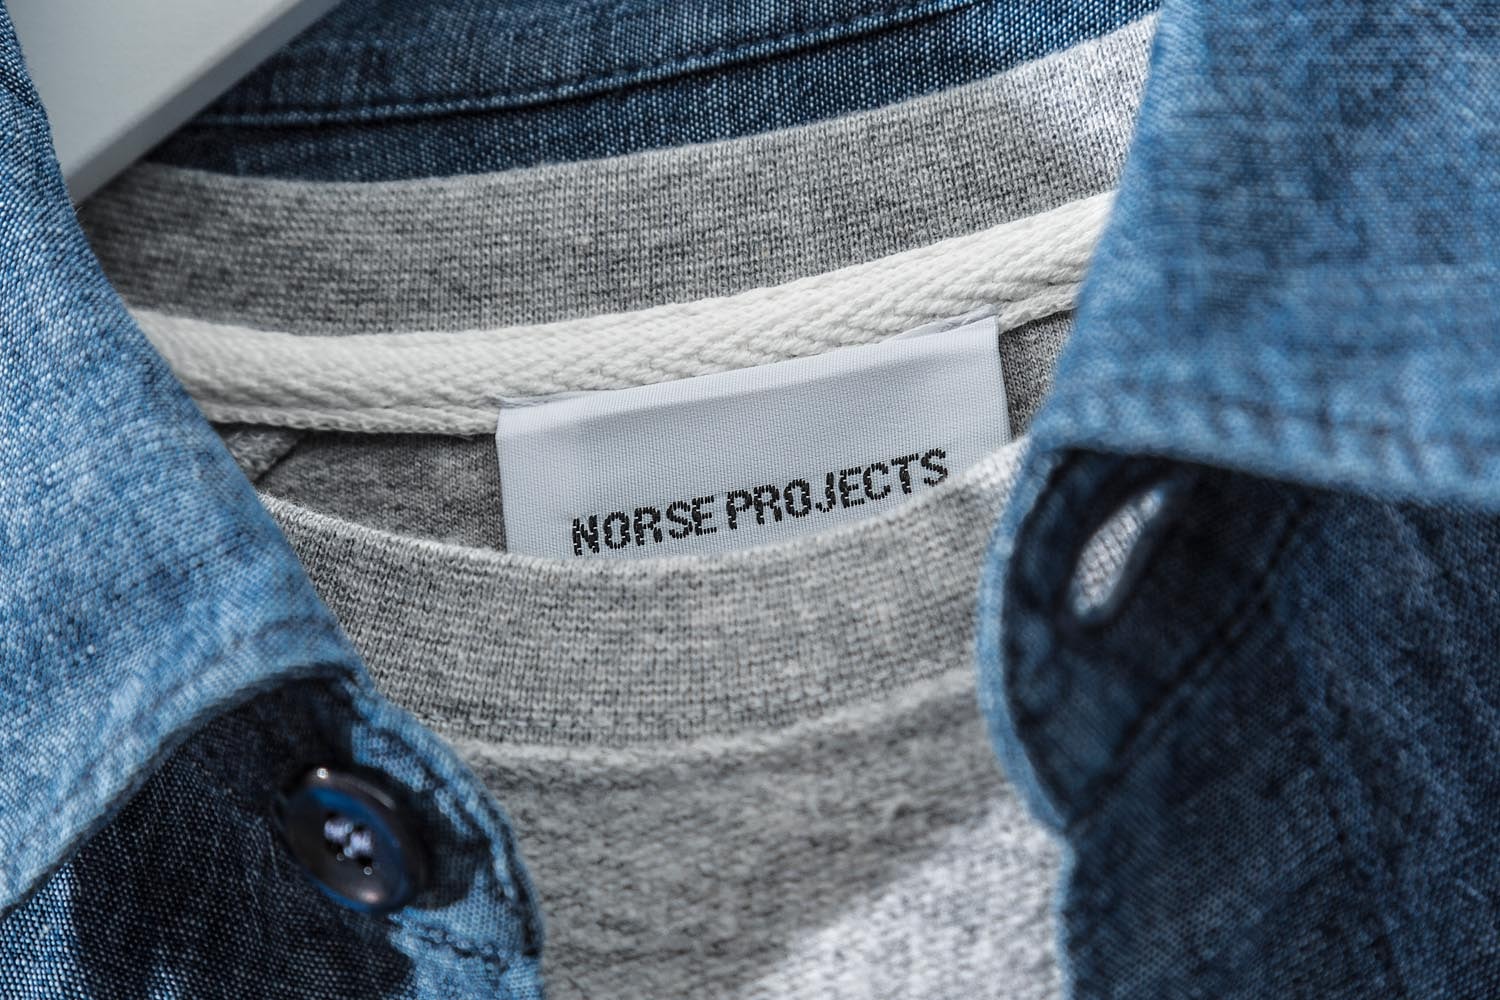 A.P.C. & Norse Projects FW17